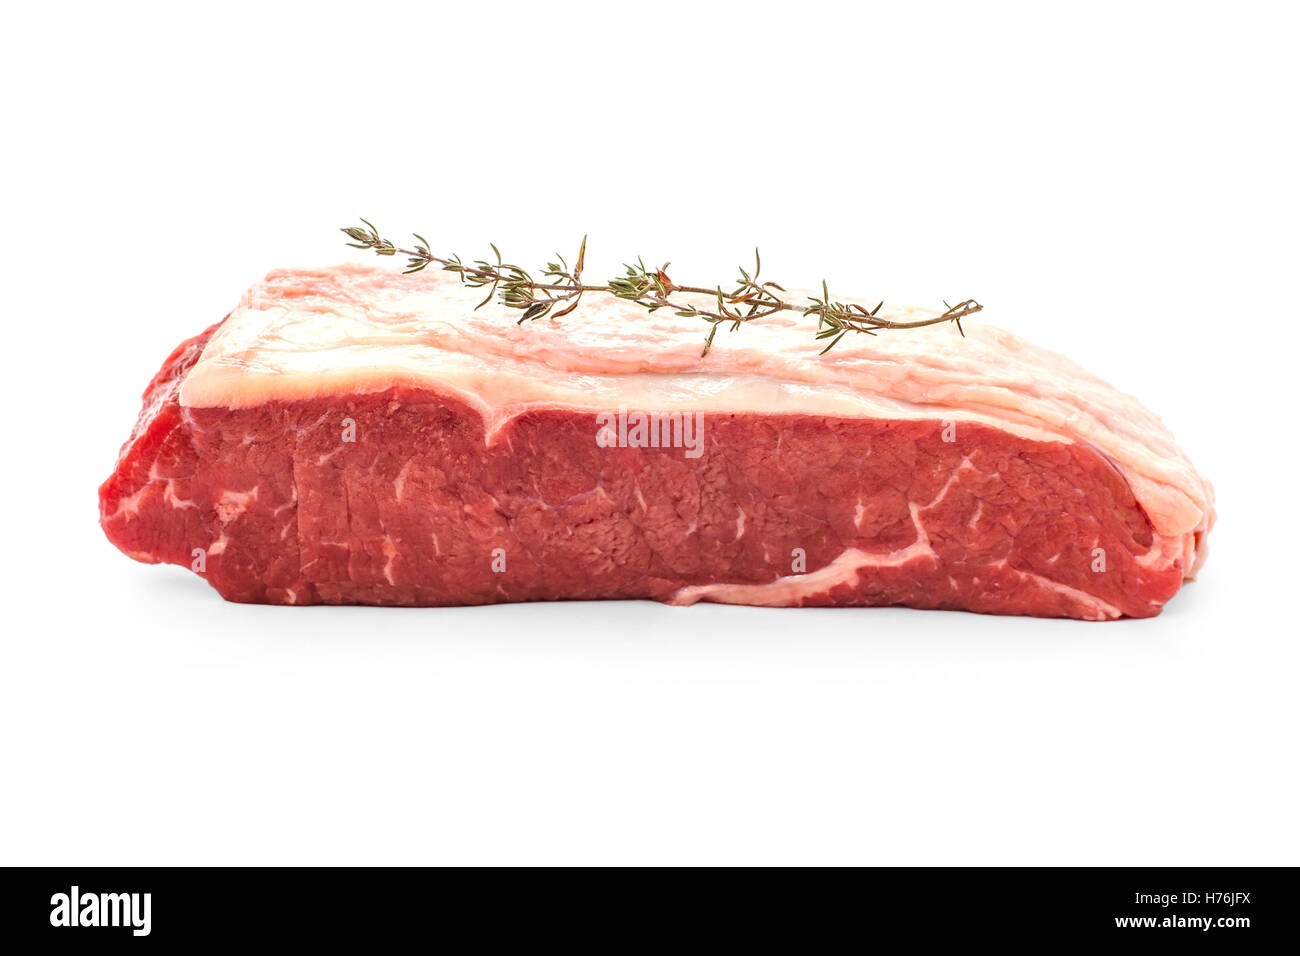 Beef rumpsteak with thyme branch, isolated Stock Photo